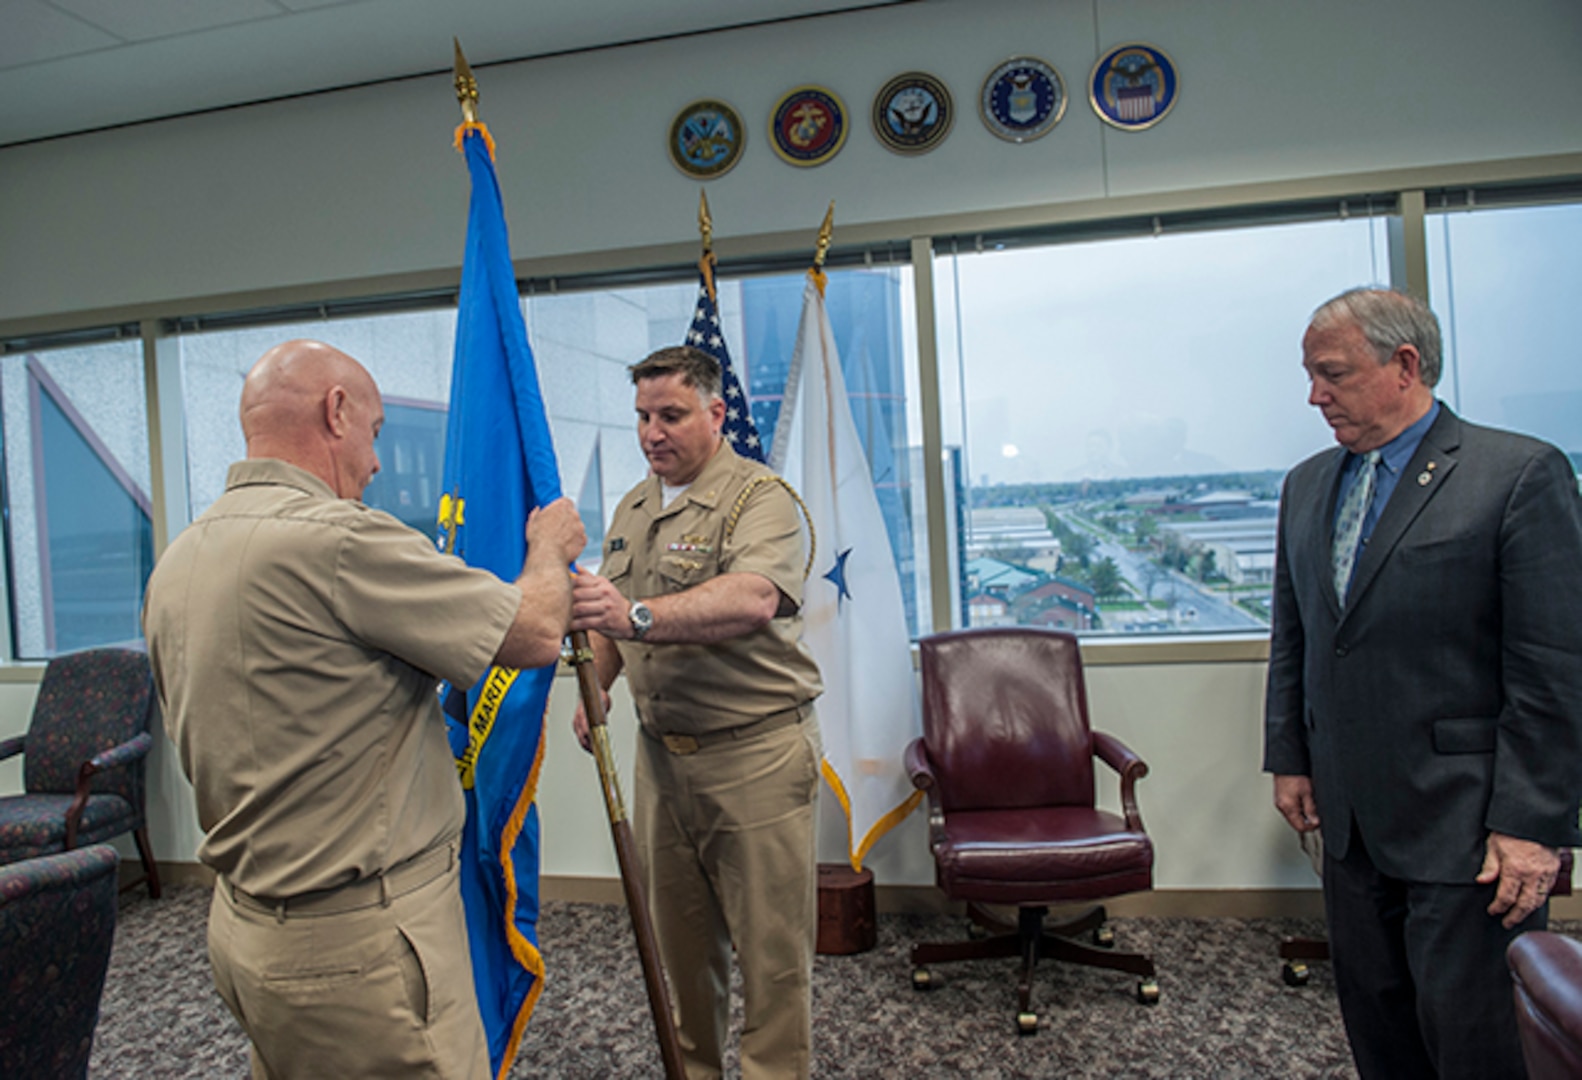 Navy Rear Admiral John King passes the organization’s flag to Navy Capt. Justin Debord, chief of staff, as he relinquishes command of DLA Land and Maritime to James McClaugherty (right). McClaugherty will serve as acting commander until the newly-identified Navy Rear Admiral Michelle Skubic arrives on station. 